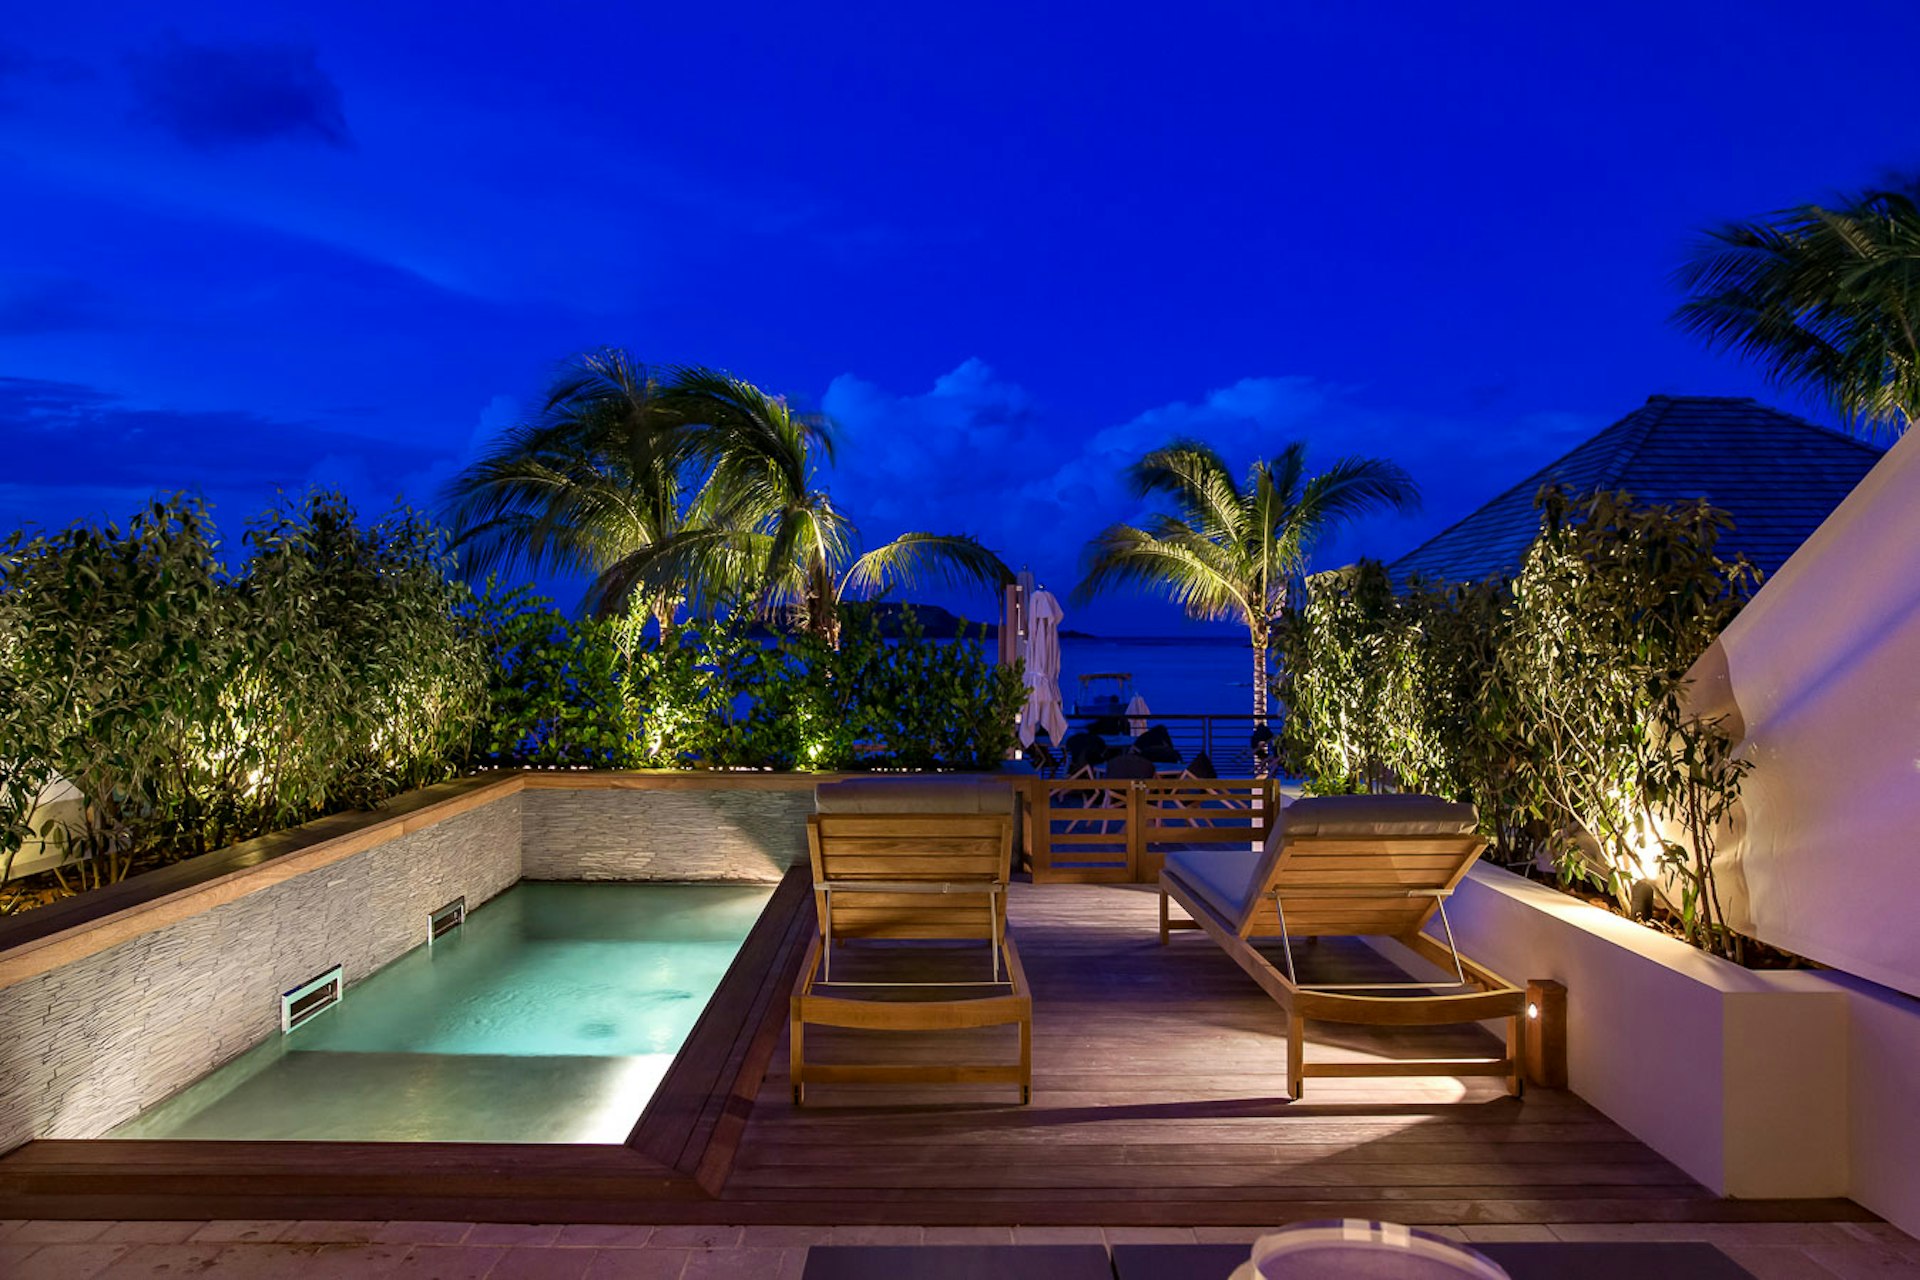 A night shot of a private plunge pool and two empty sunloungers on a deck facing out towards the ocean